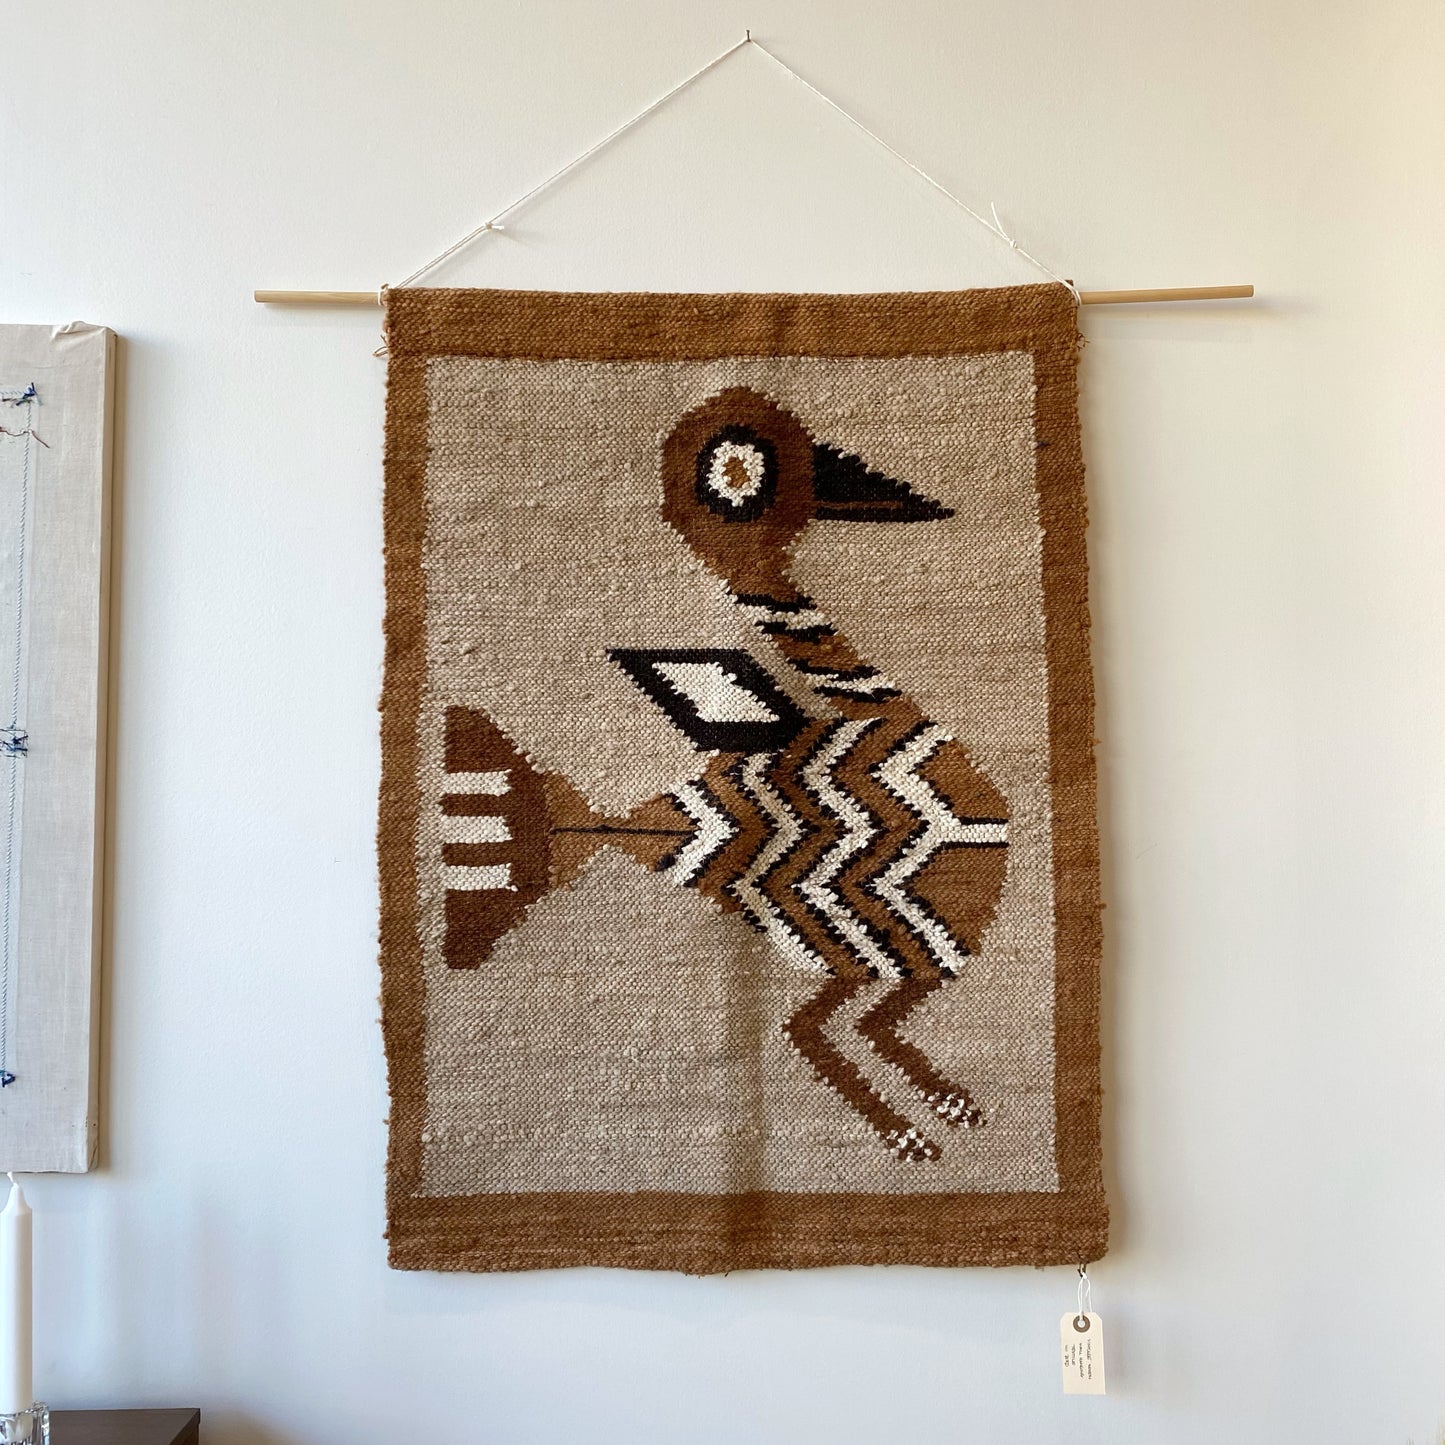 Vintage Woven Wall Hanging / Textile with Bird